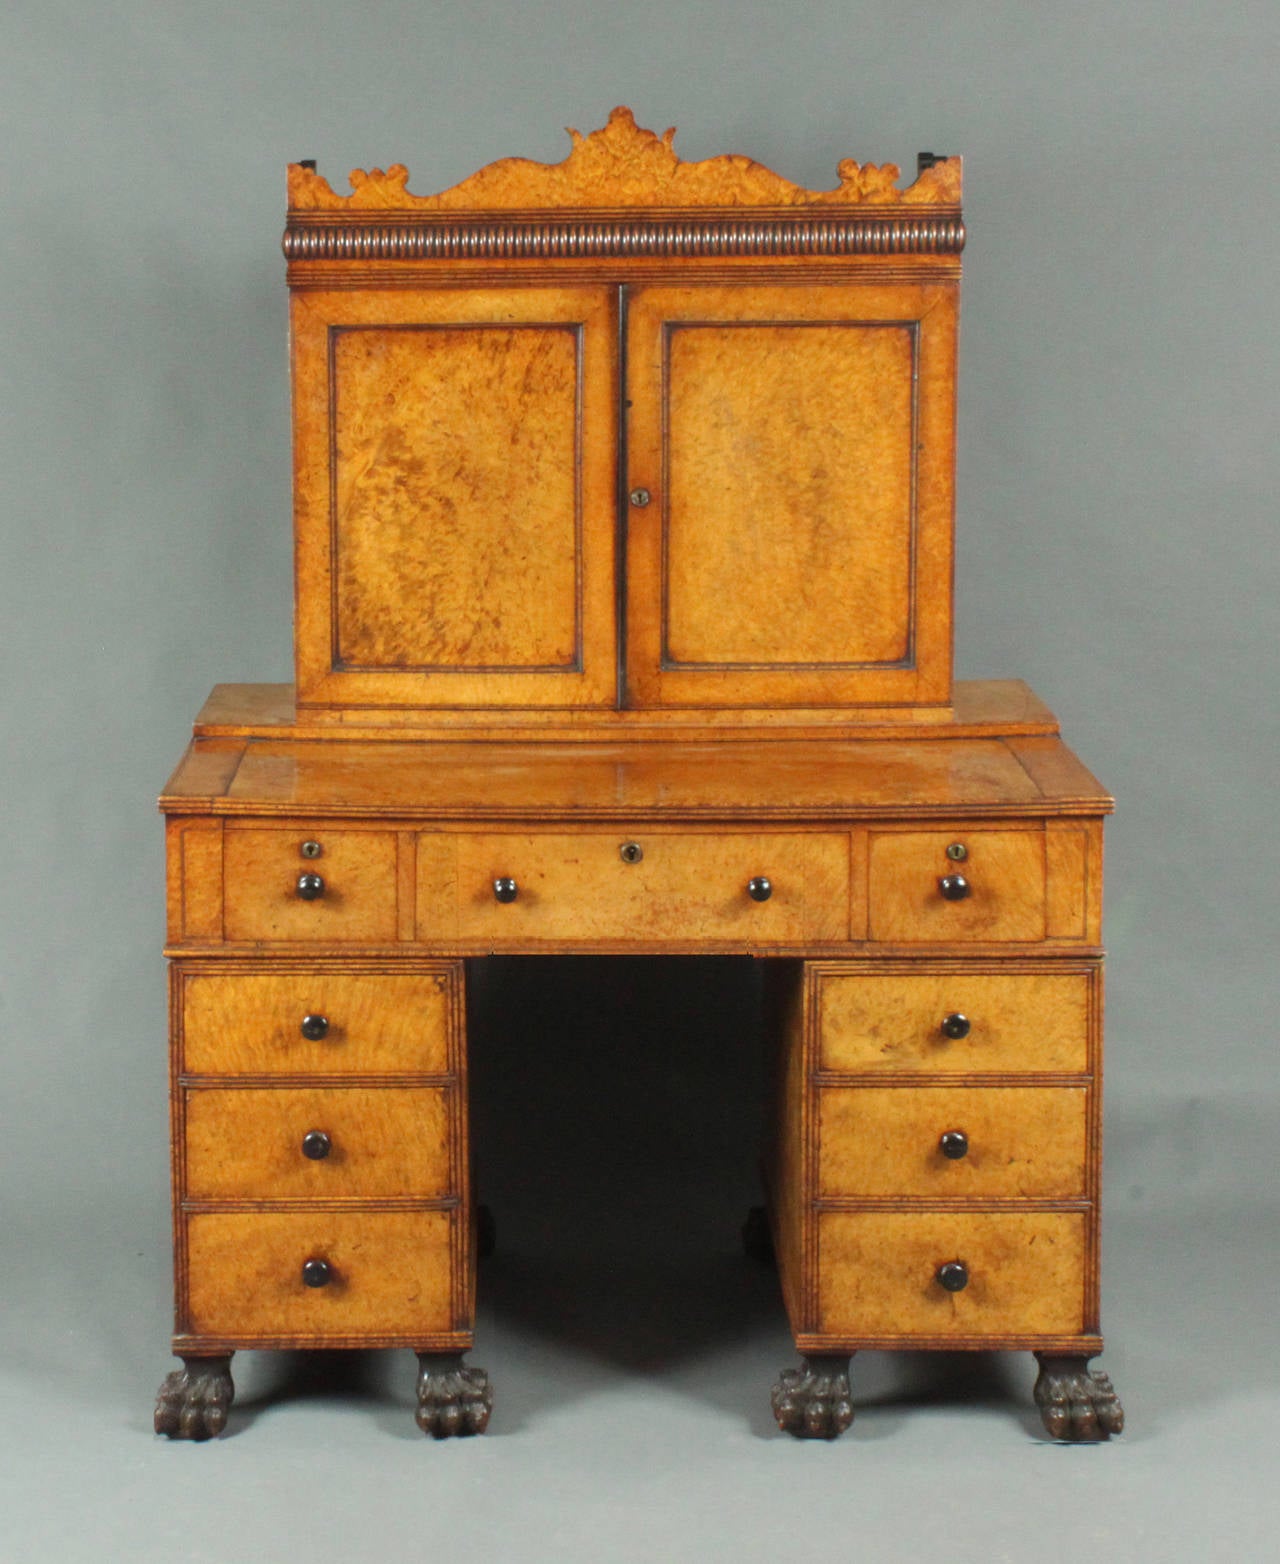 A rare Chinese-made desk made in amboyna wood with a fitted bookcase above; the centre drawer with a writing slope on a ratchet, the right hand drawer with a movable pen box. All the lower drawers lock with a clever mechanism accessed from the